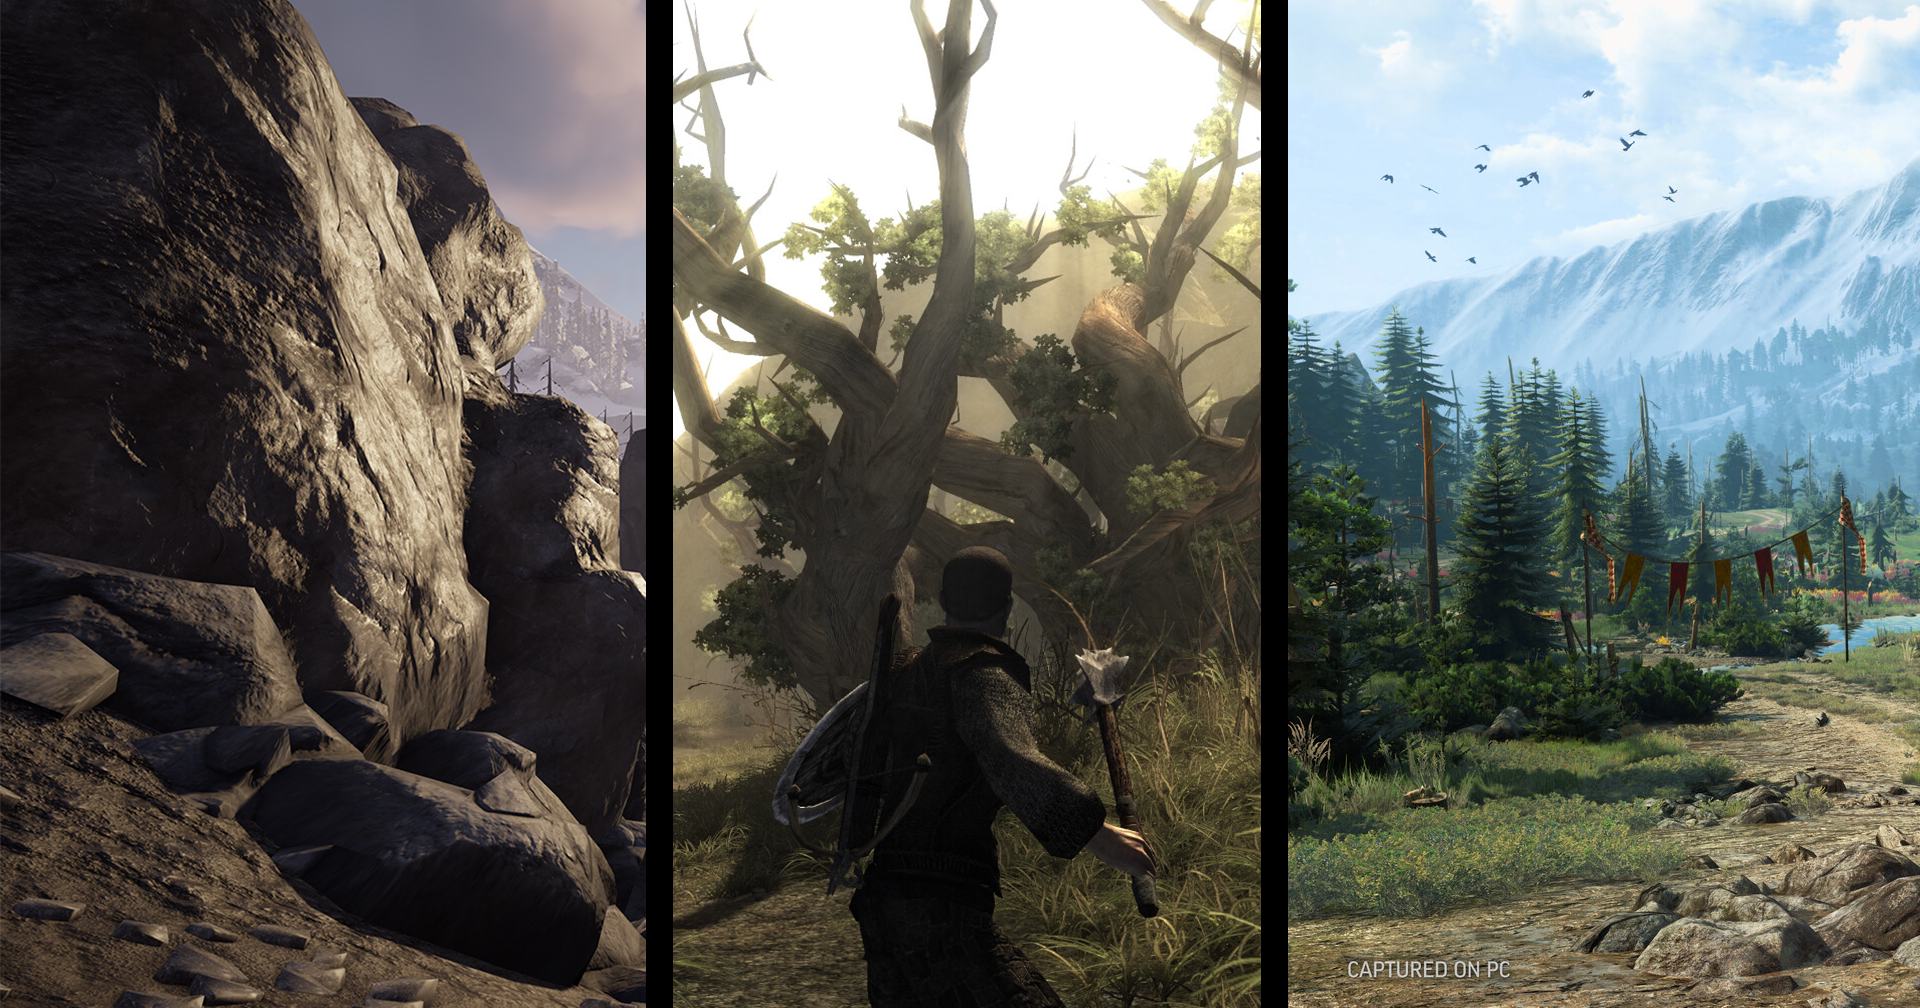 We see a collage consisting of three screenshots from games like Gothic Remake. The titles all feature expansive landscapes.